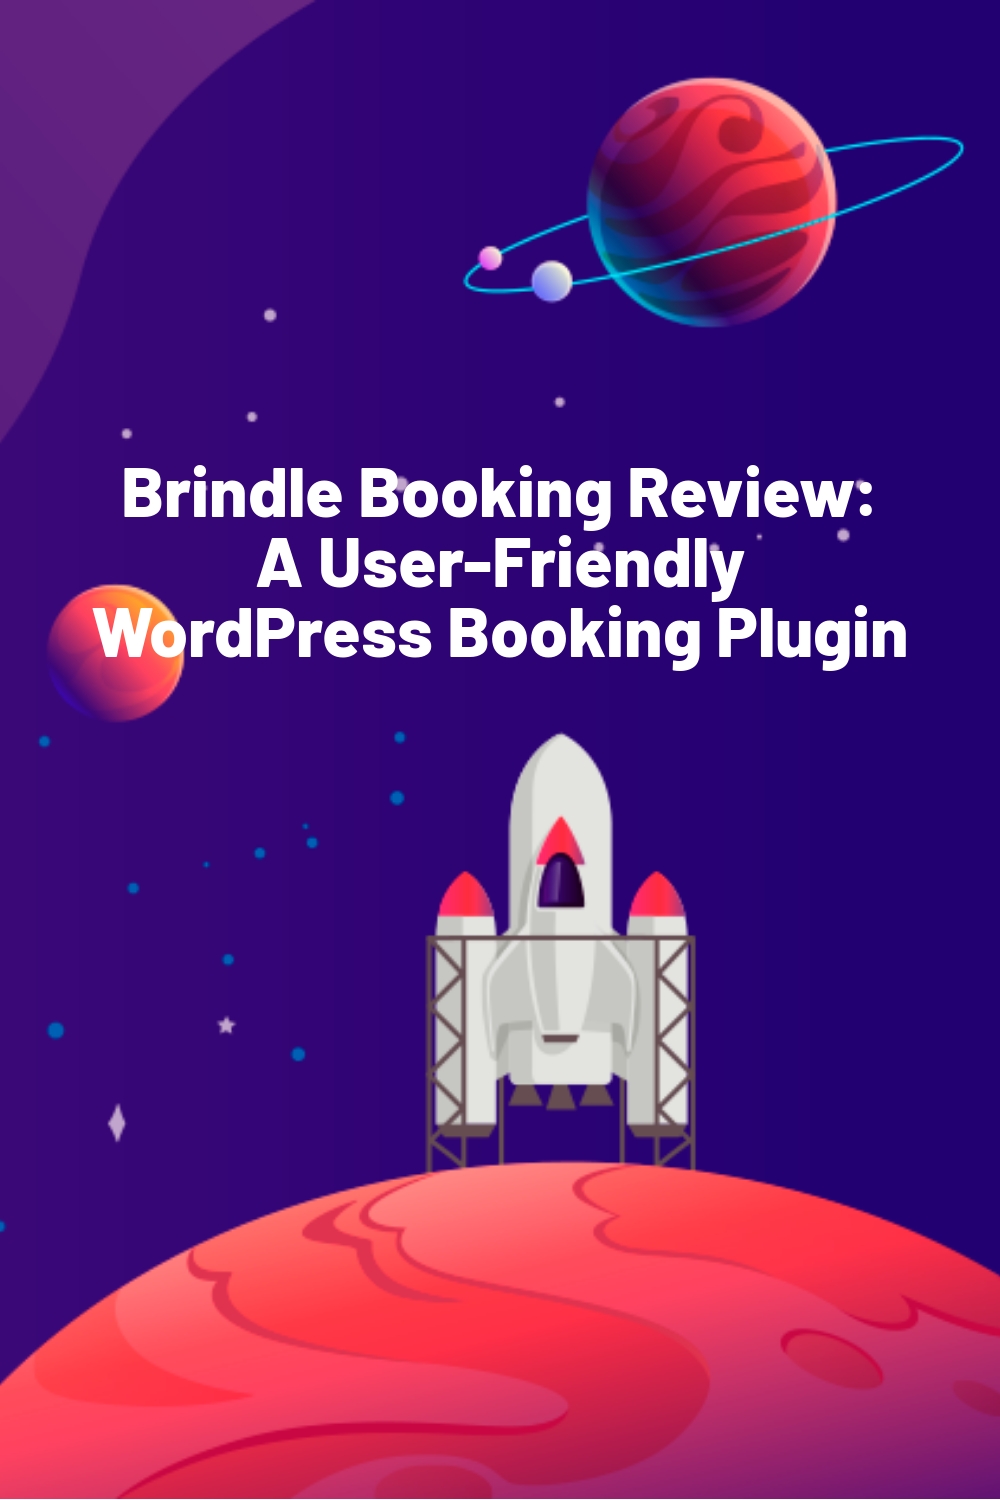 Brindle Booking Review: A User-Friendly WordPress Booking Plugin